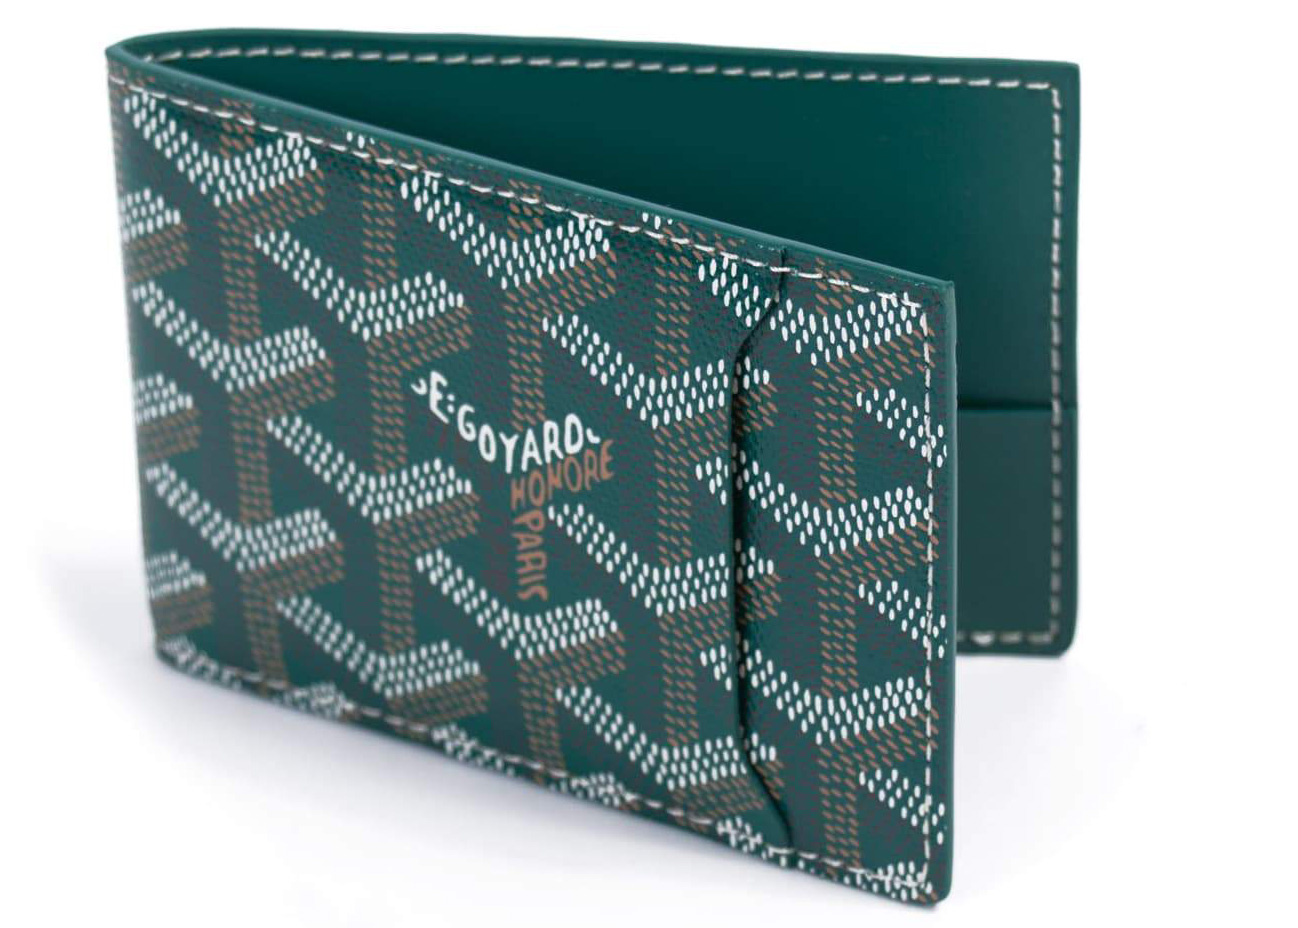 how much does a goyard wallet cost